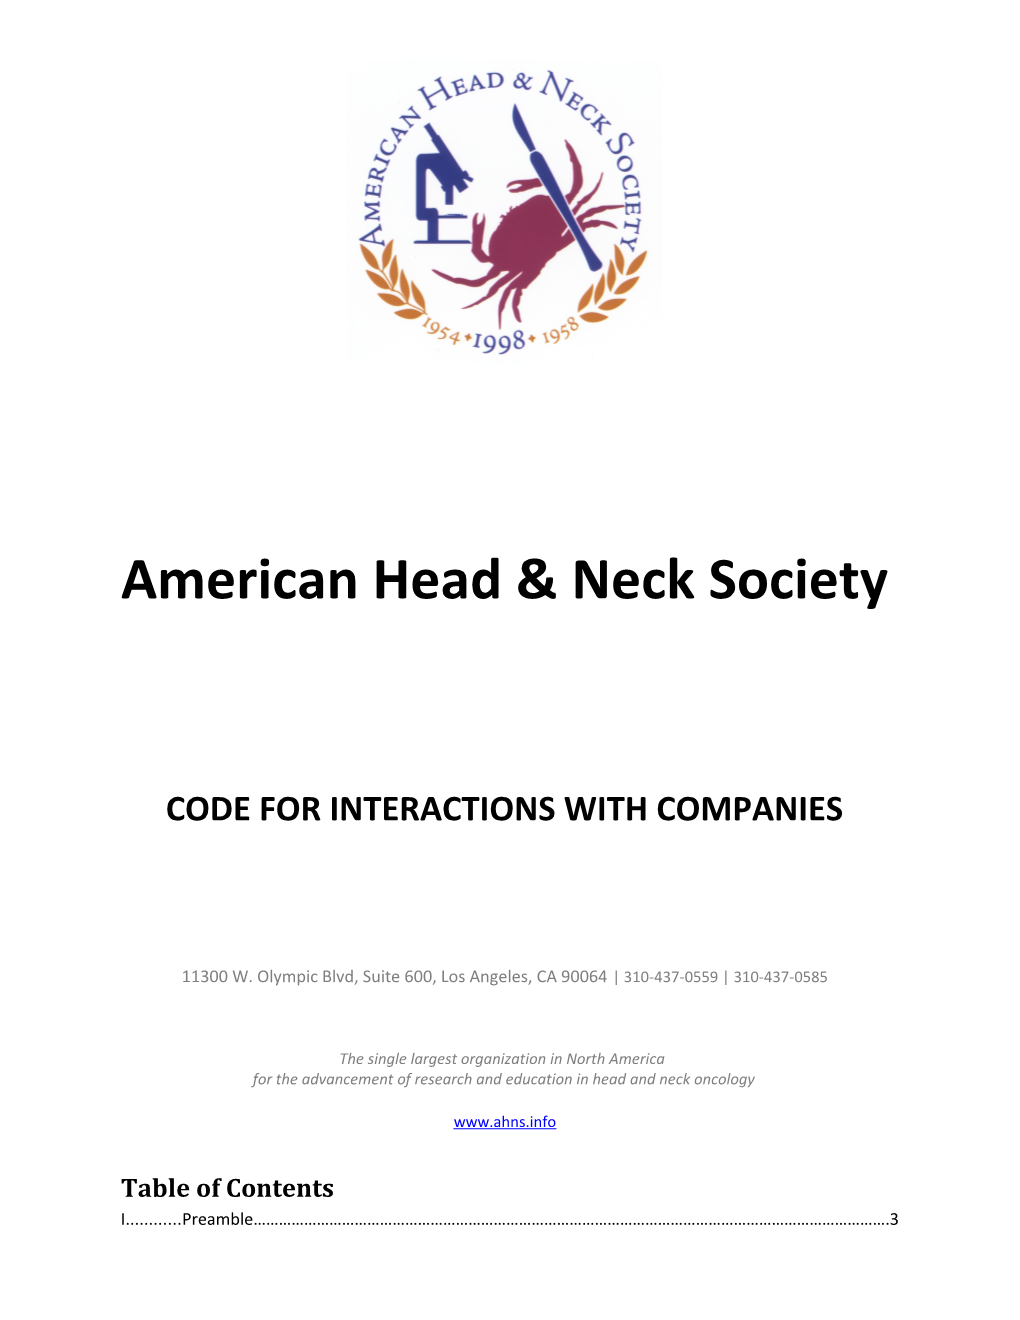 AHNS Code for Interactions with Companies